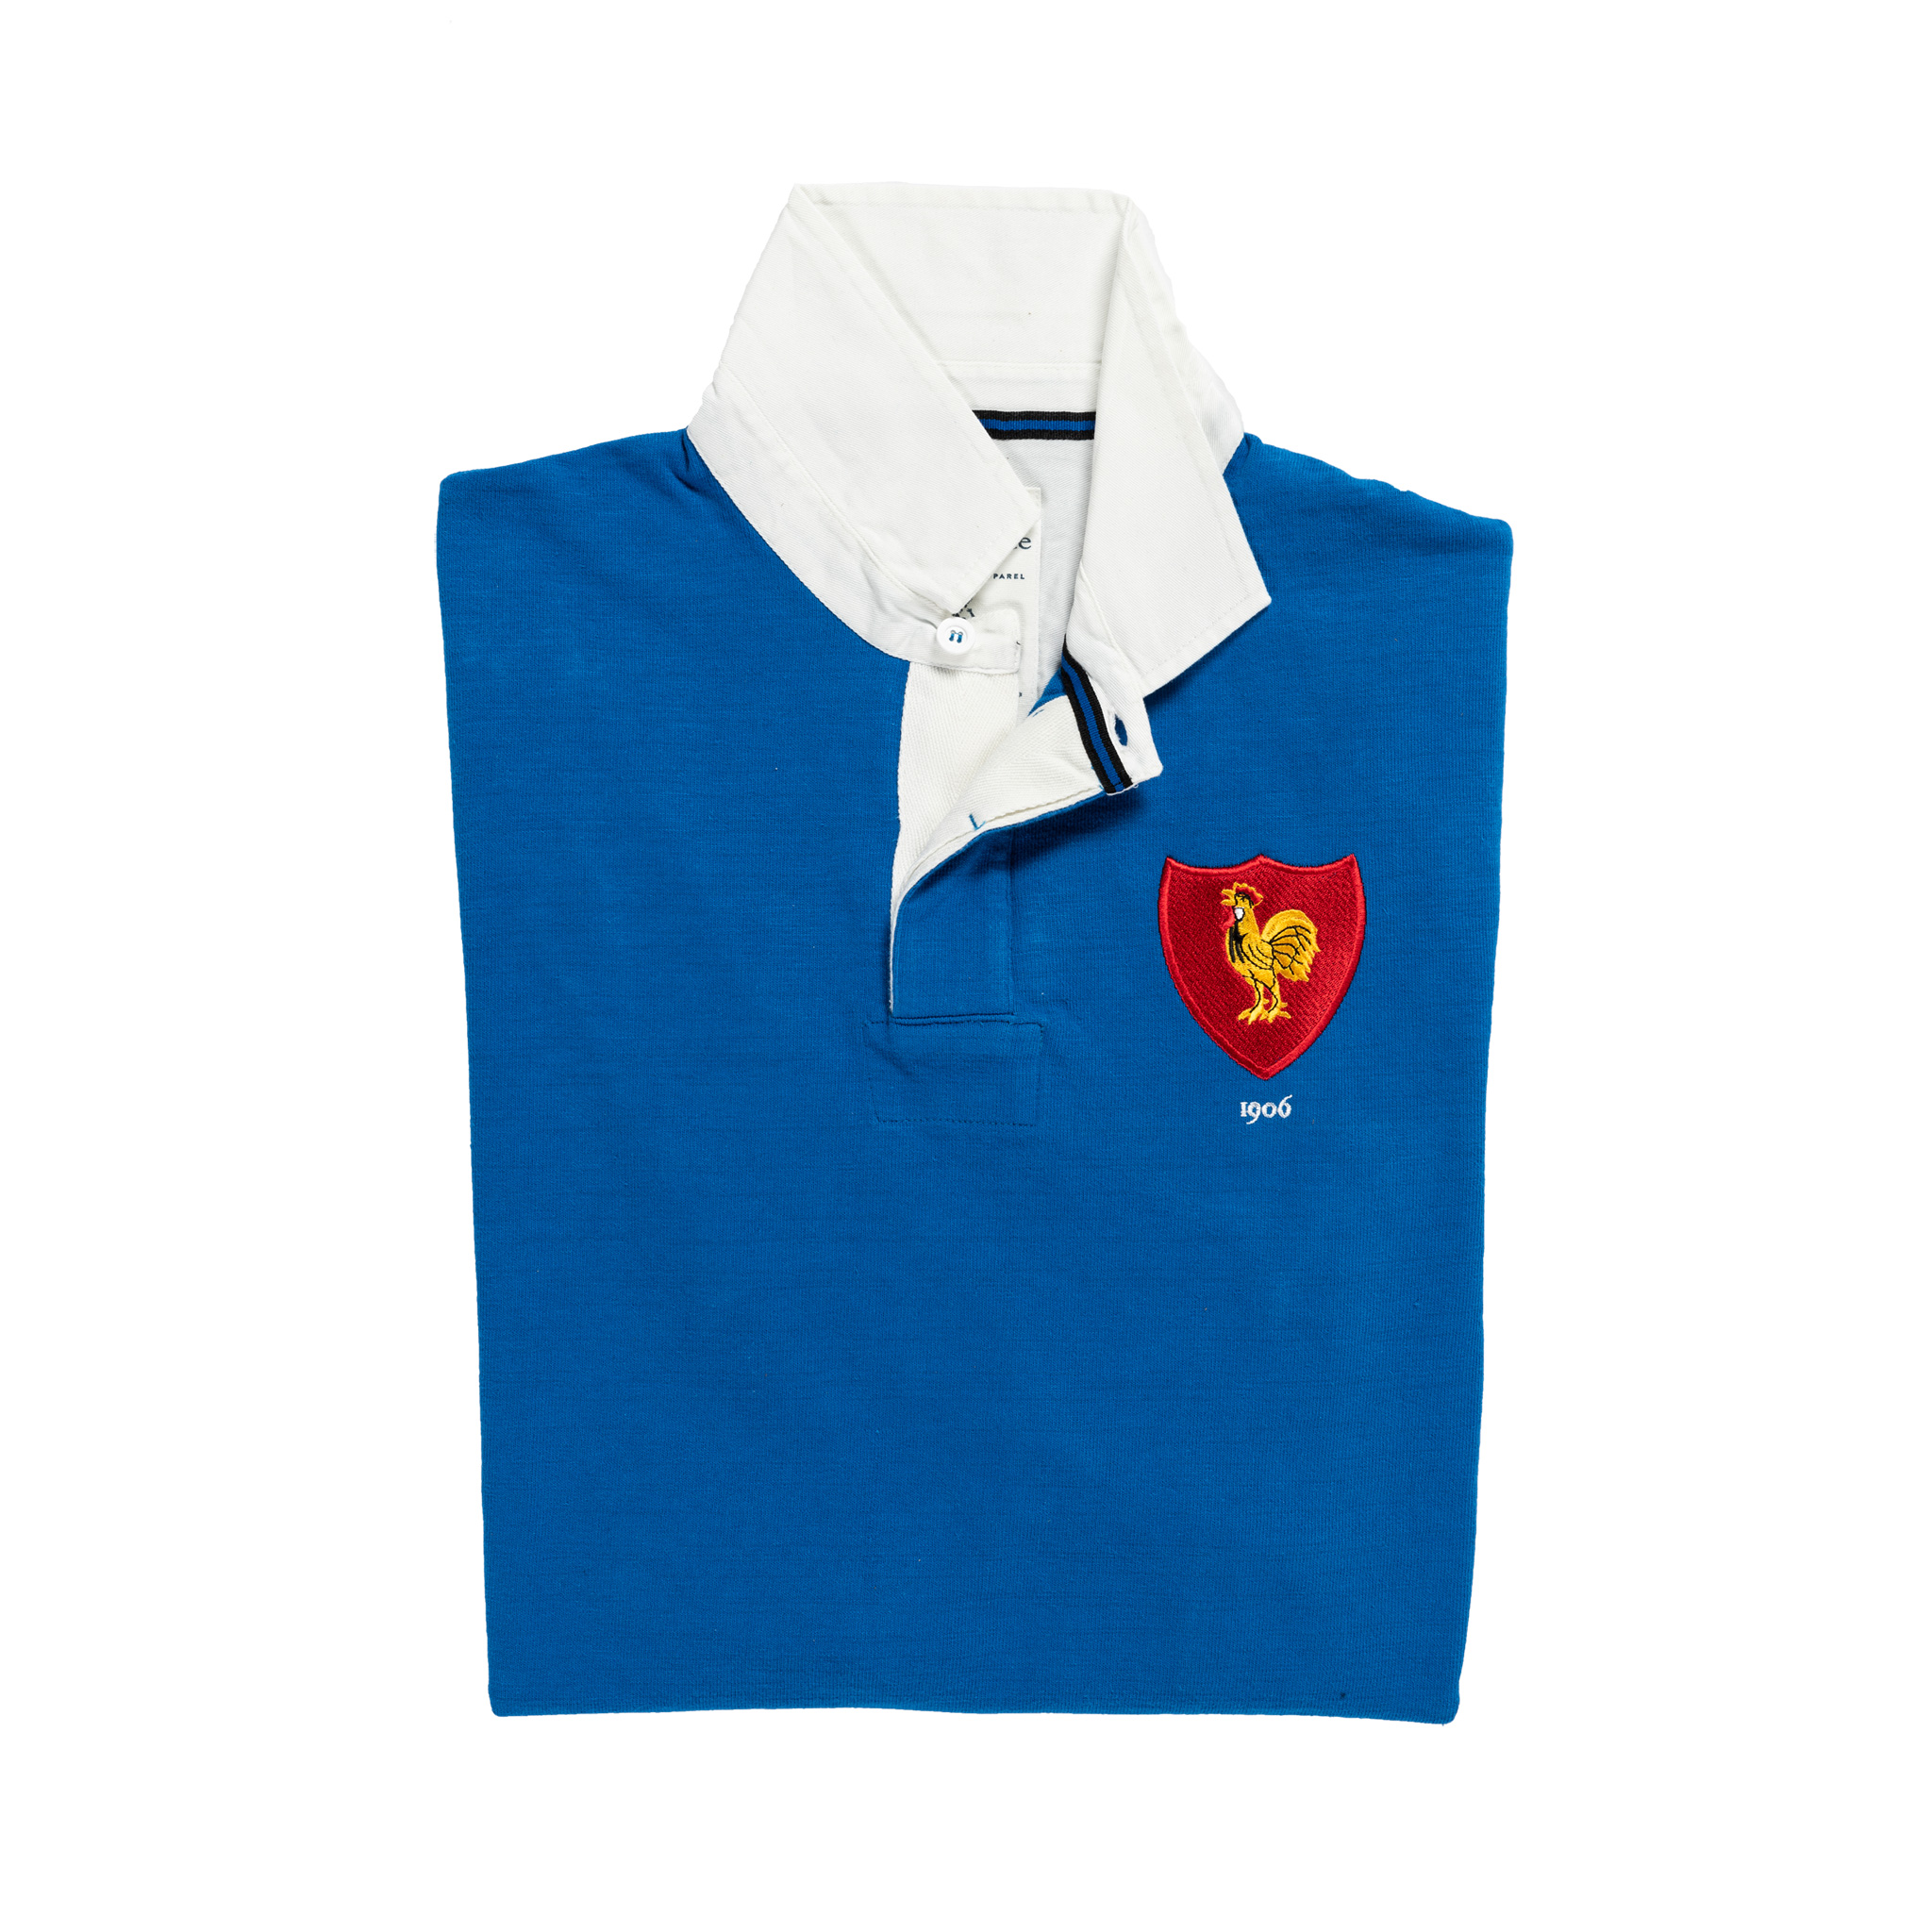 TRADITIONAL 6 NATIONS FRANCE CLASSIC RUGBY SHIRTS SIZES SMALL TO LARGE 